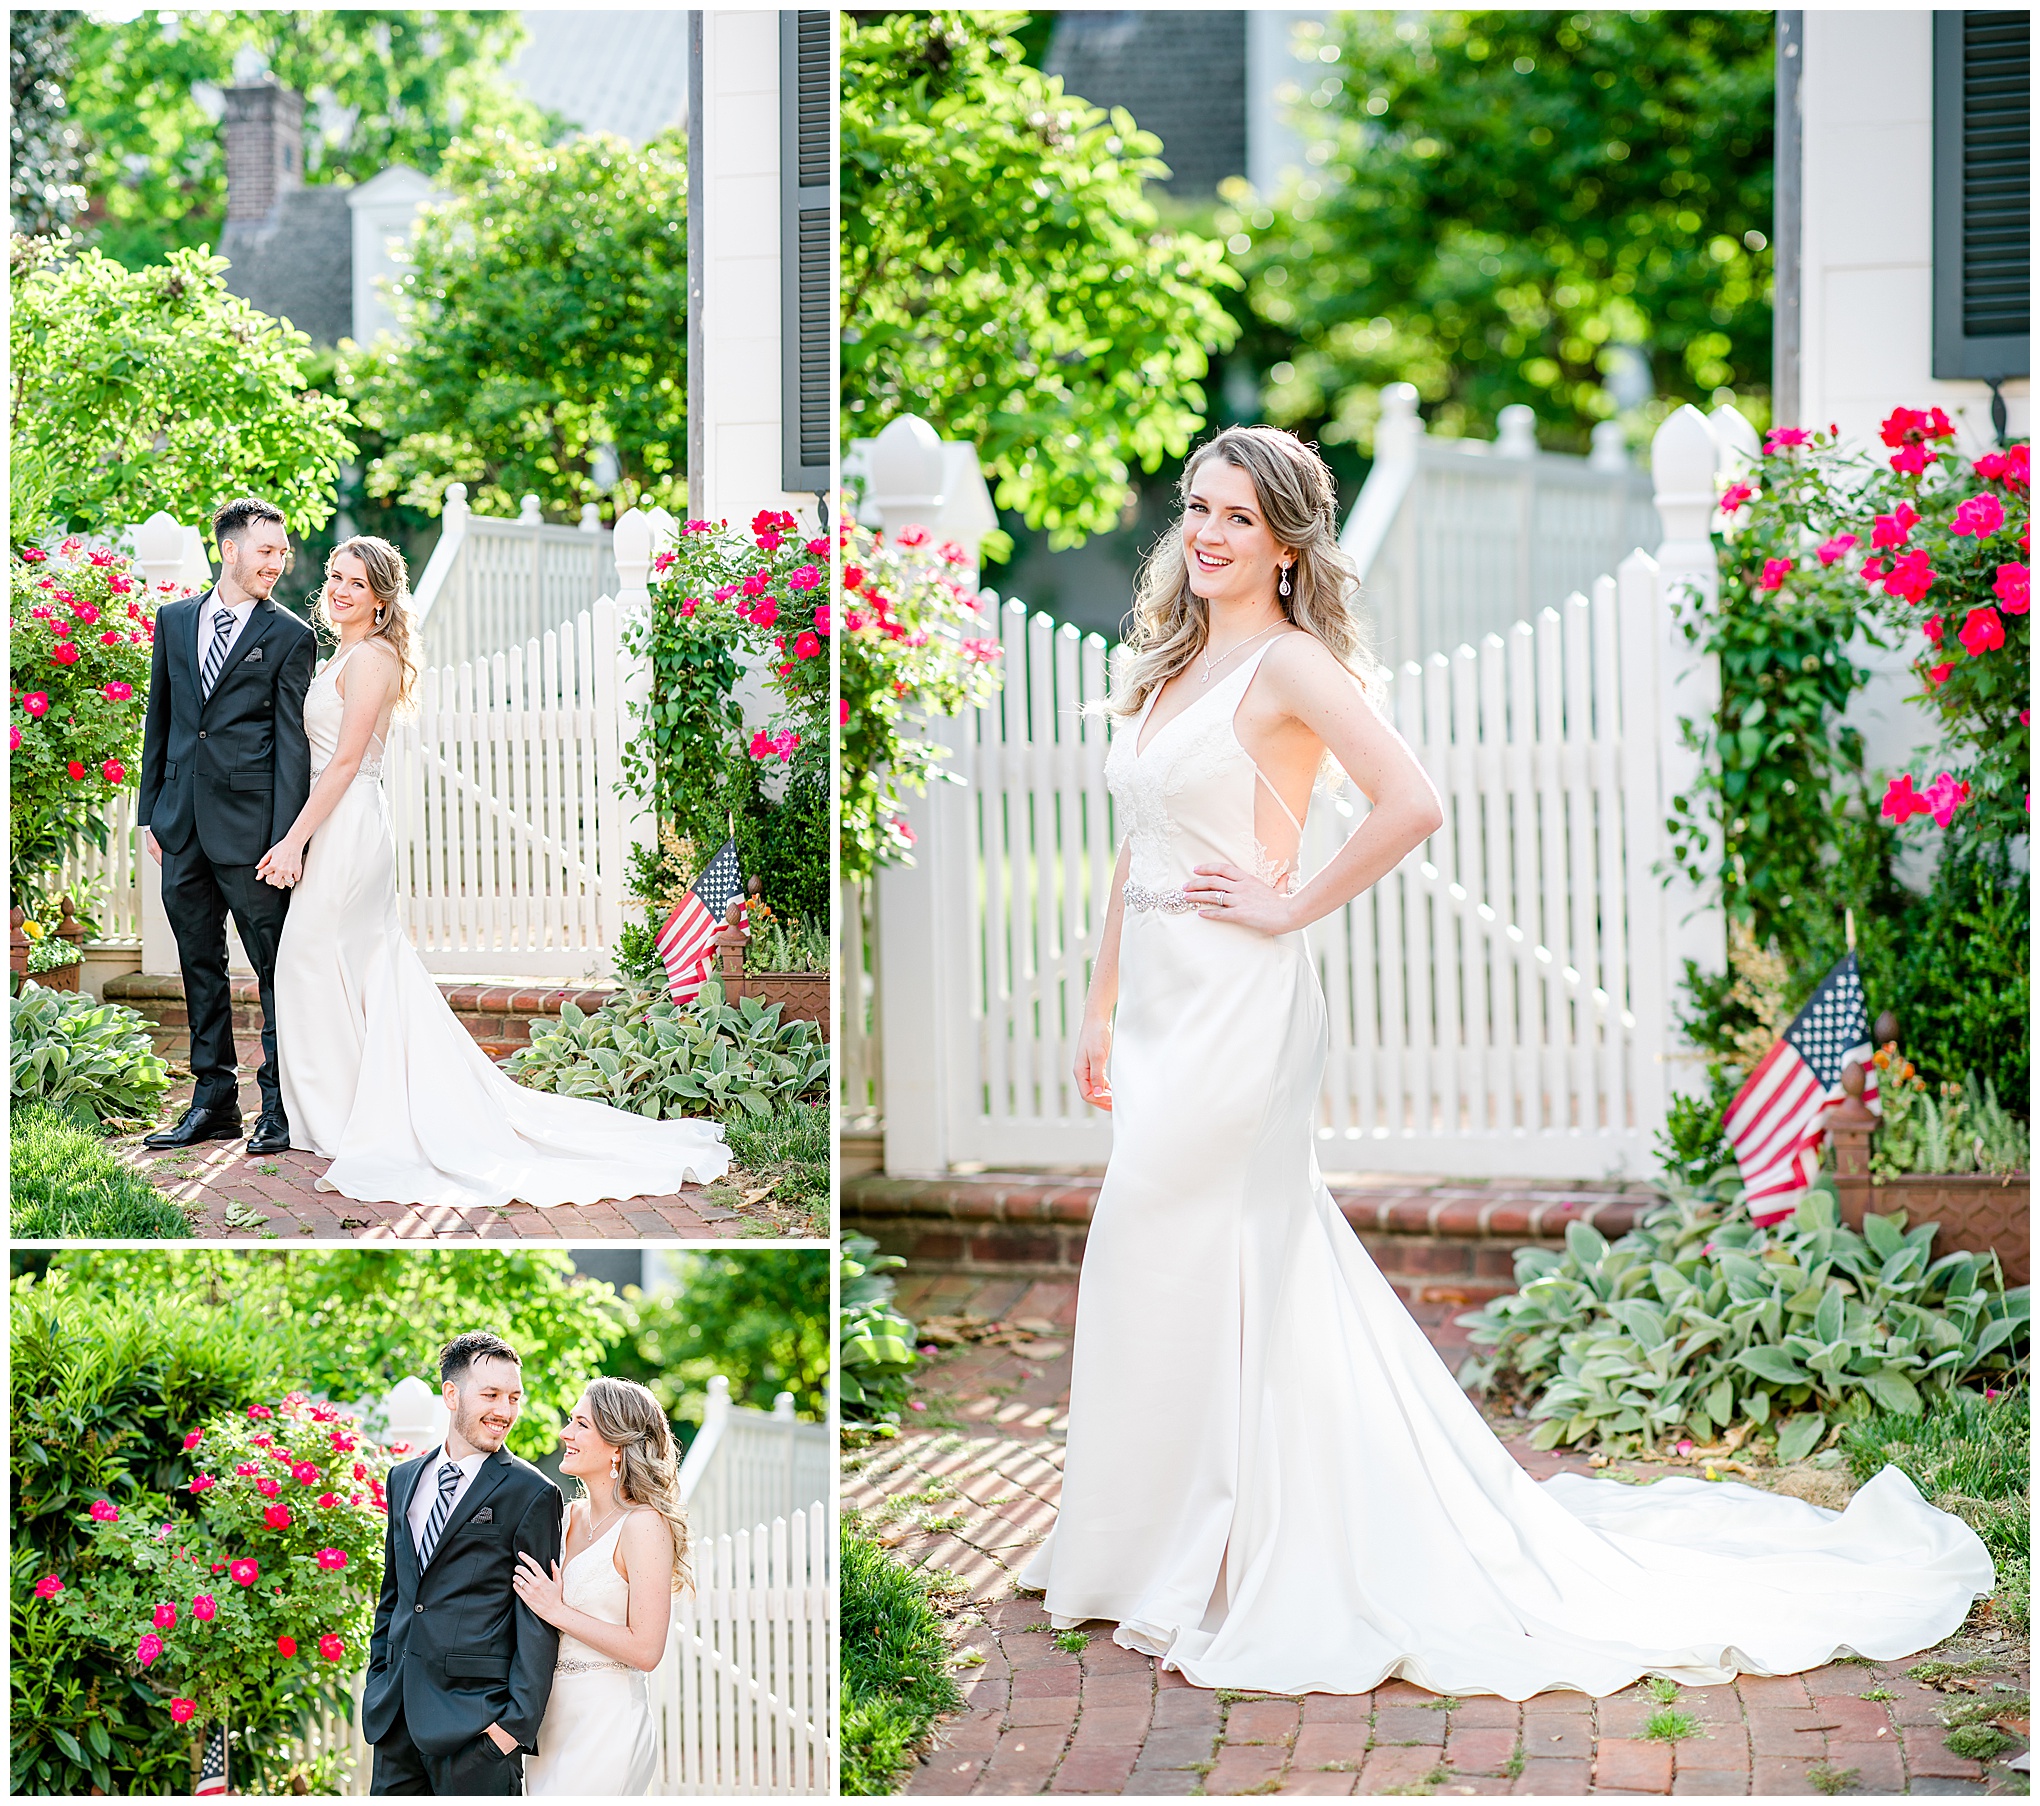 glowing spring Alexandria elopement, Alexandria wedding photographer, Old Town wedding photographer, Old Town Alexandria, Old Town wedding, spring wedding, DC area wedding, DC wedding photographer, Rachel E.H. Photography, classic bride and groom, rose garden portraits